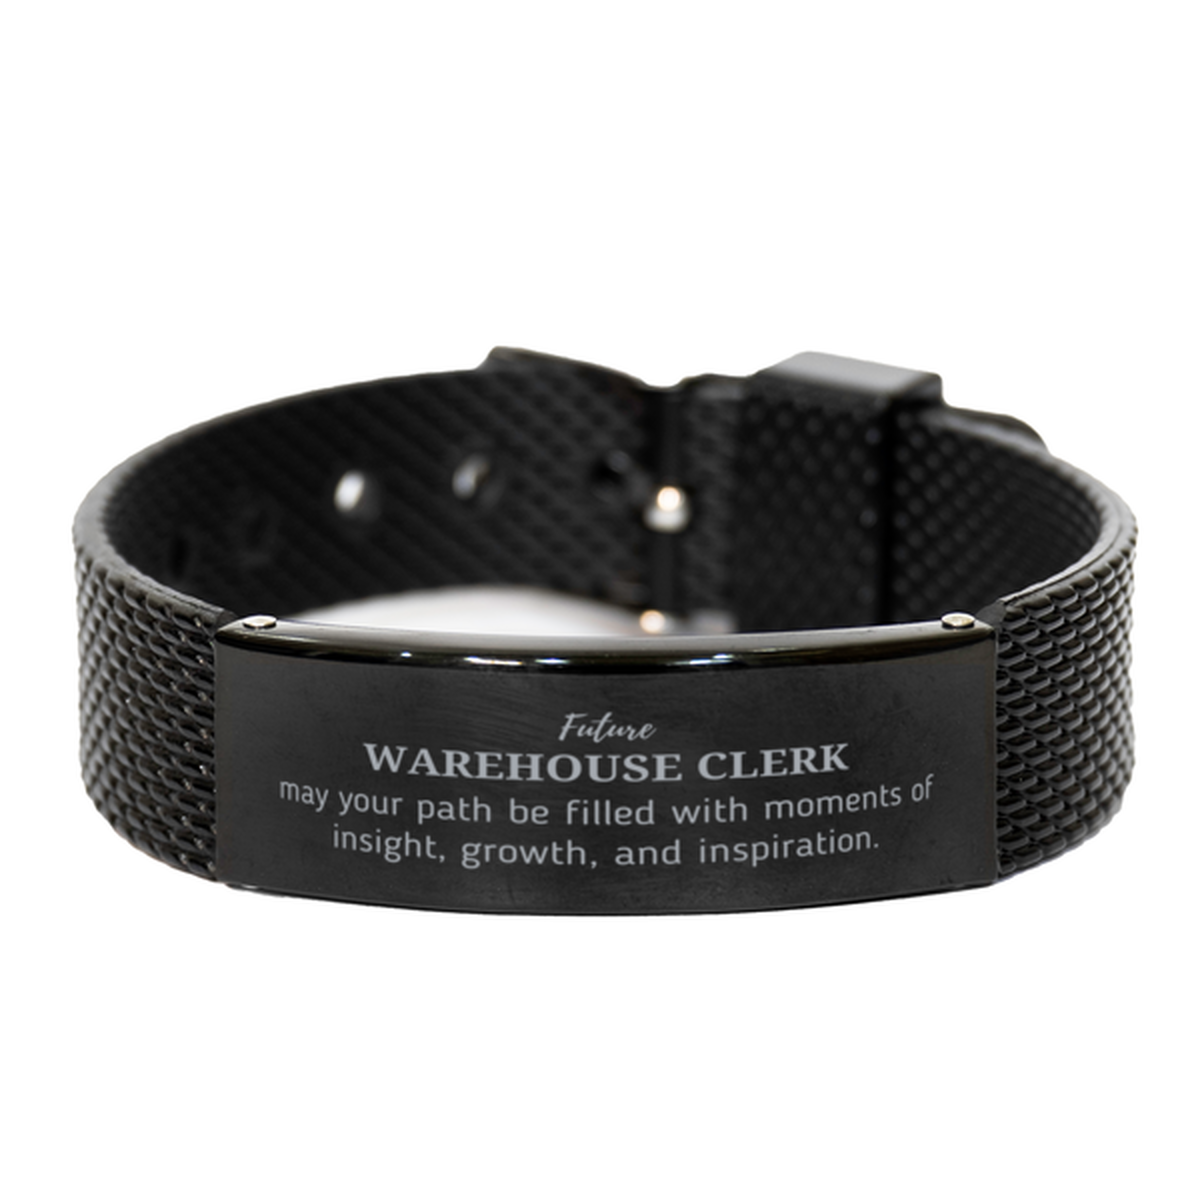 Future Warehouse Clerk Gifts, May your path be filled with moments of insight, Graduation Gifts for New Warehouse Clerk, Christmas Unique Black Shark Mesh Bracelet For Men, Women, Friends